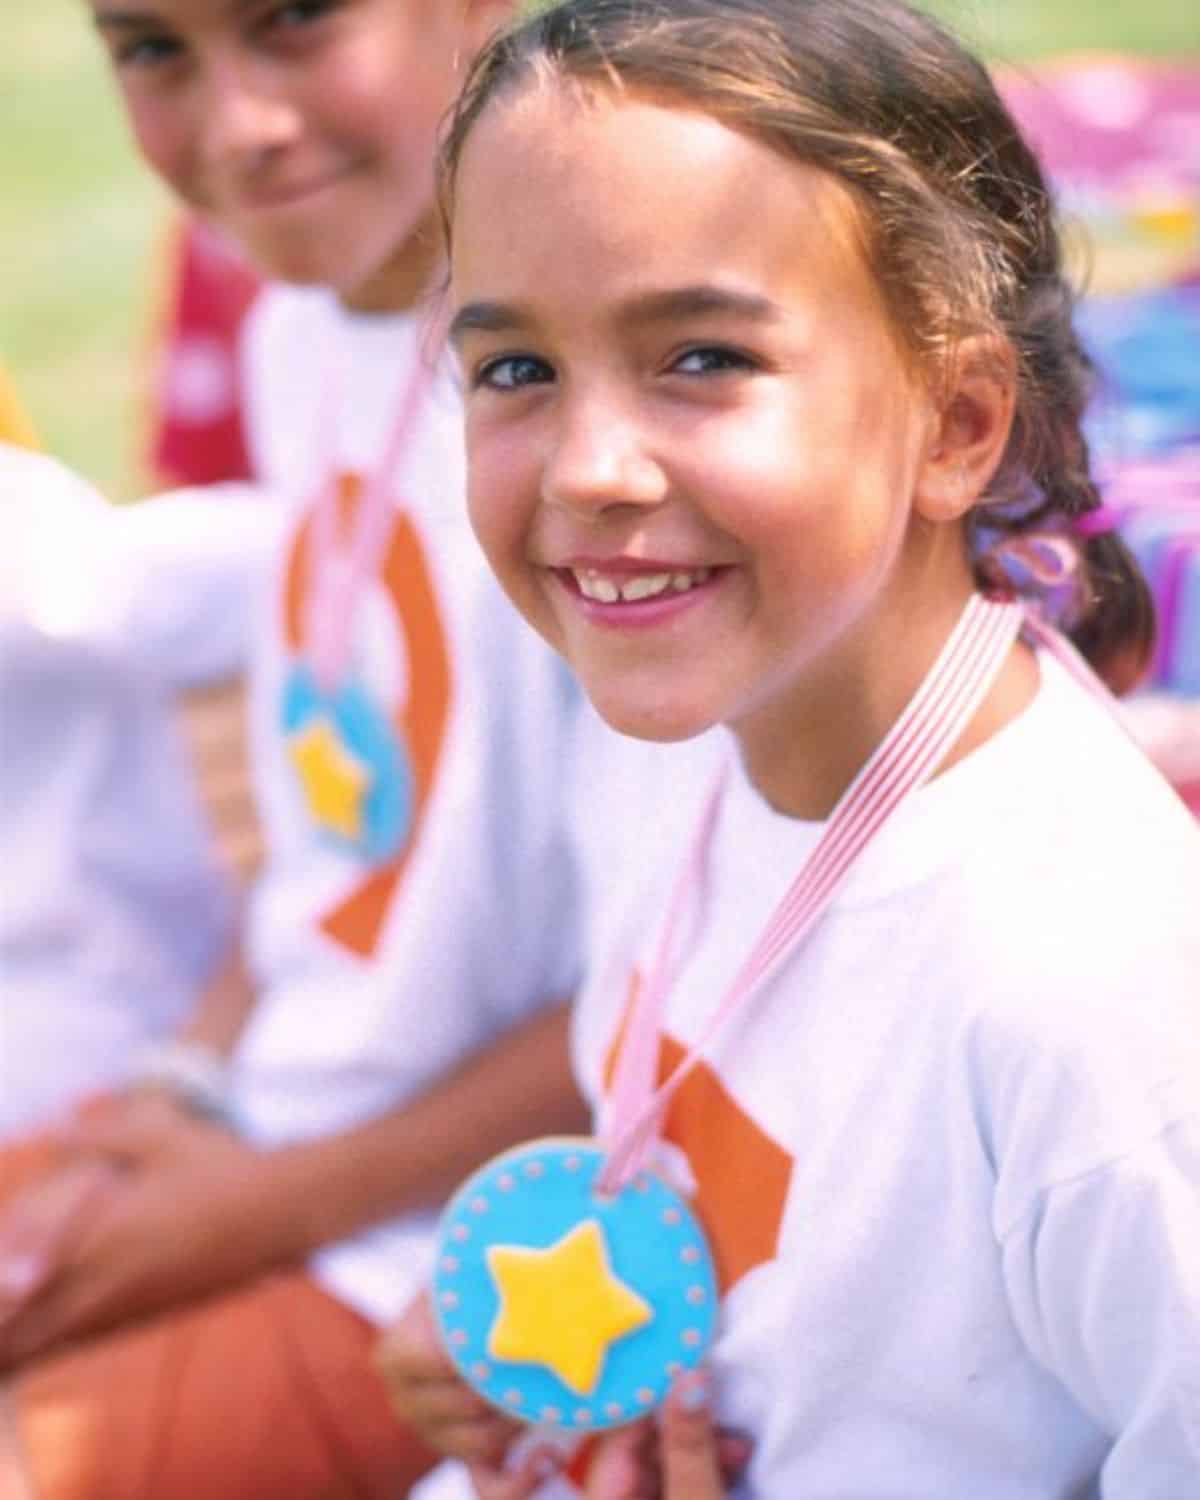 Young girl with a medal looking into a camera.